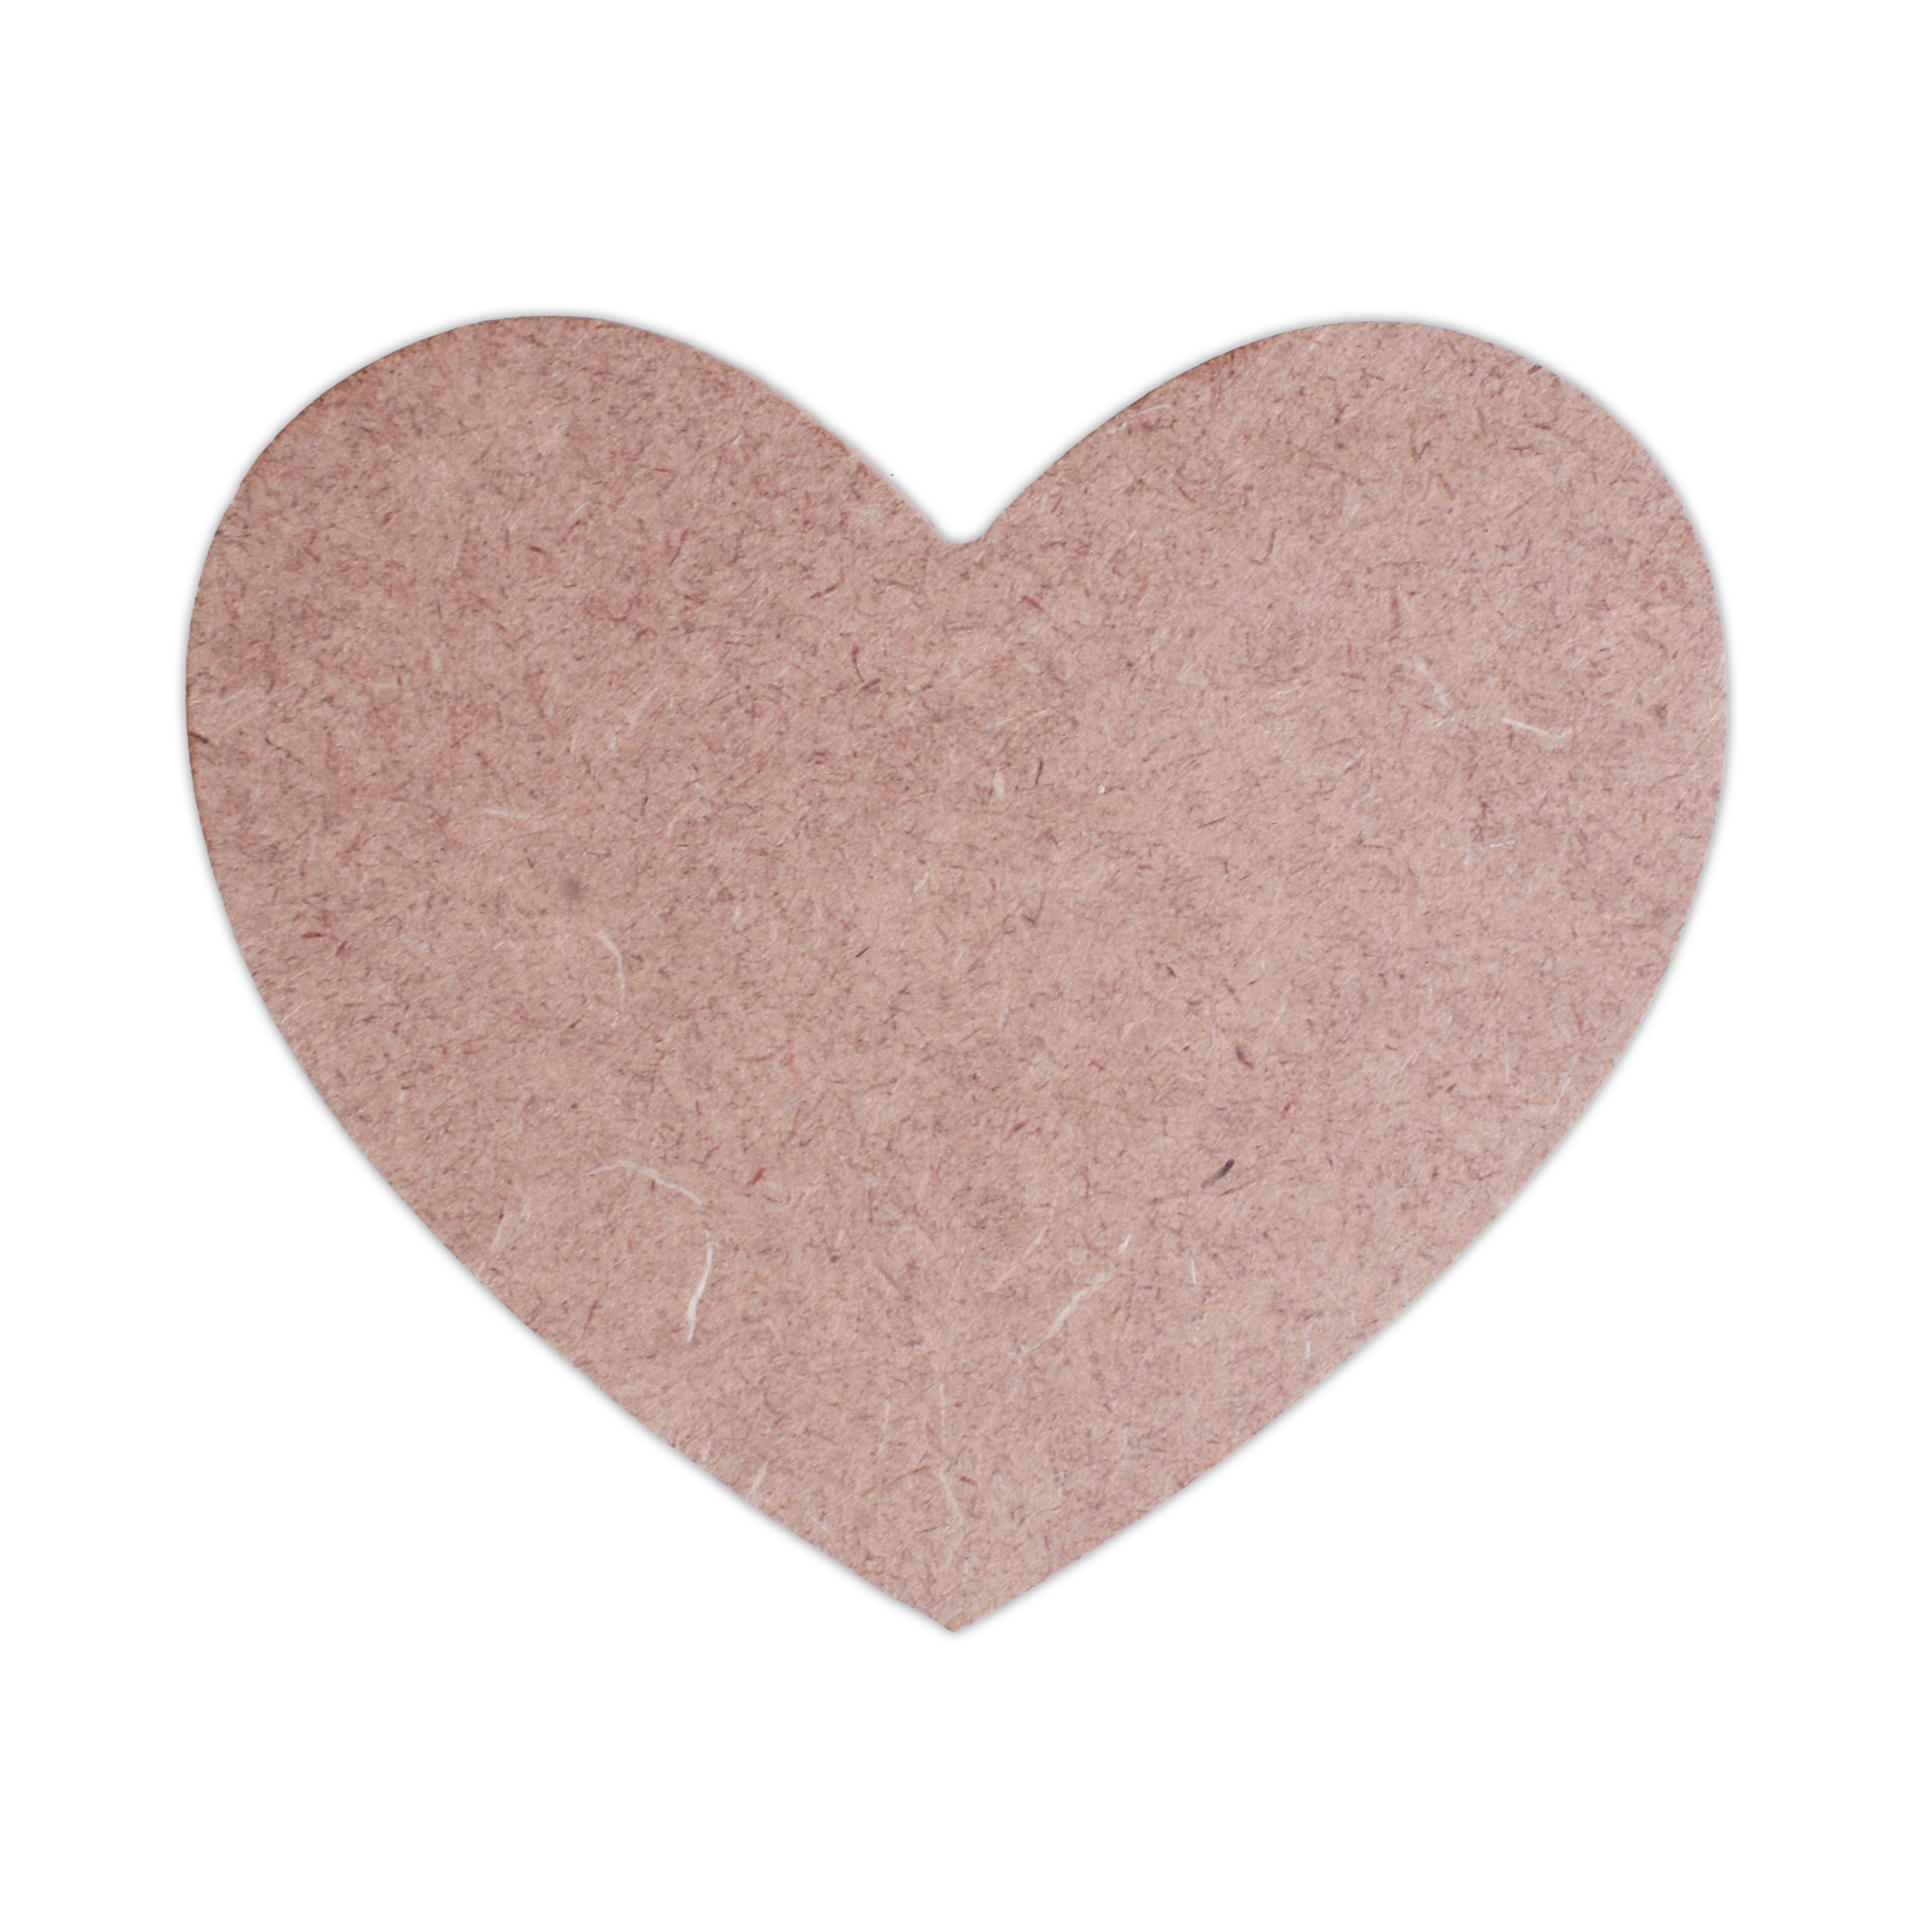 MDF Coaster Heart 4inch Dia 5.5mm Thick Set of 6pc